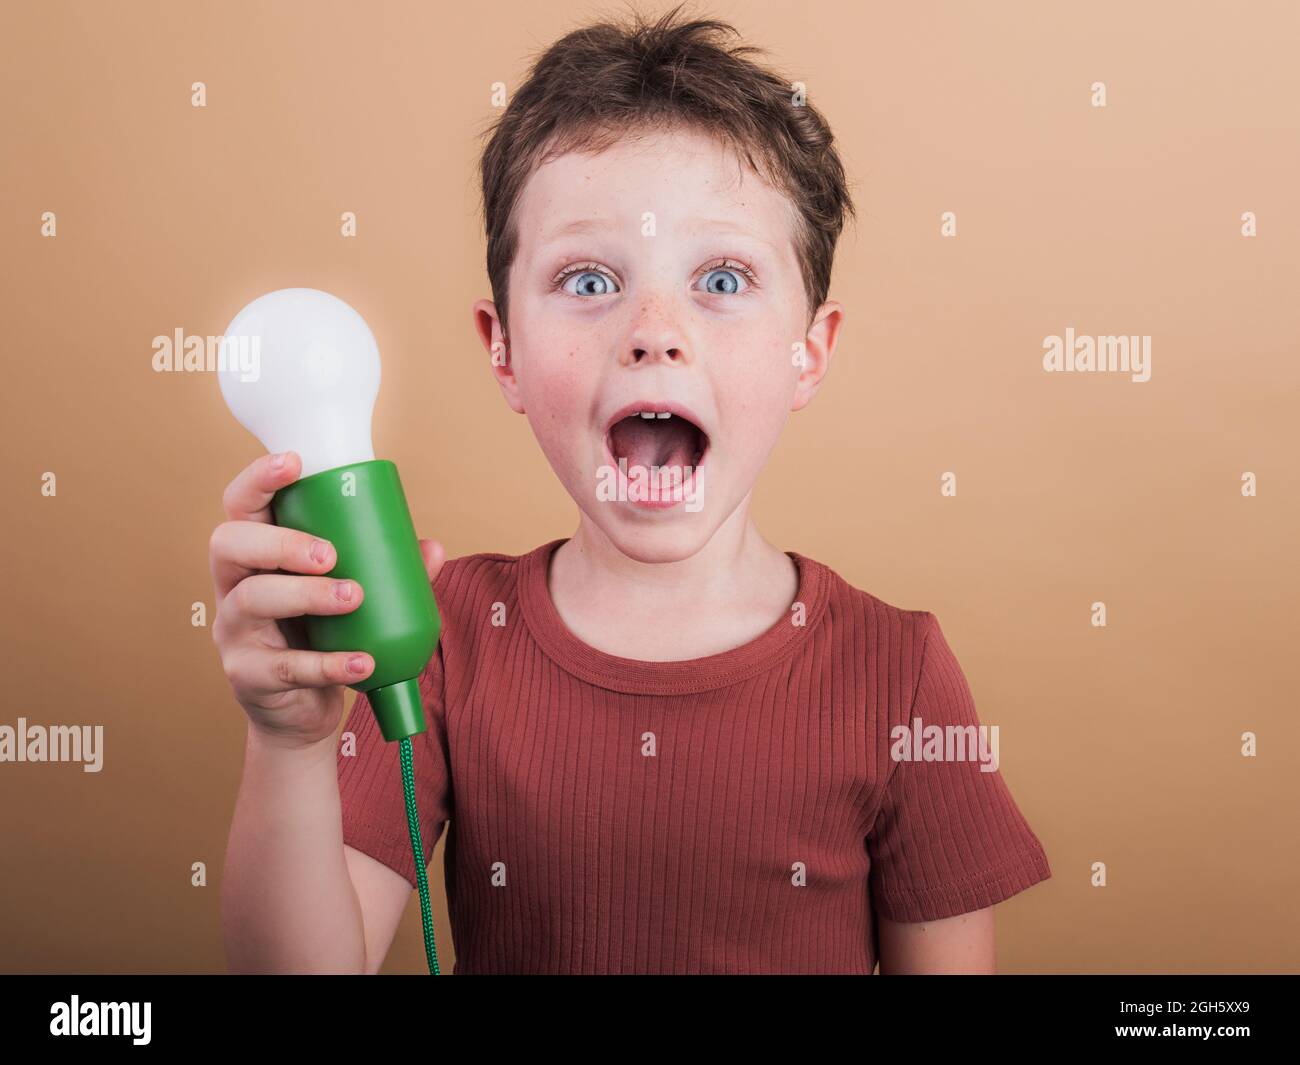 Pondering child in t shirt with plastic light bulb representing idea concept looking at camera on beige background Stock Photo